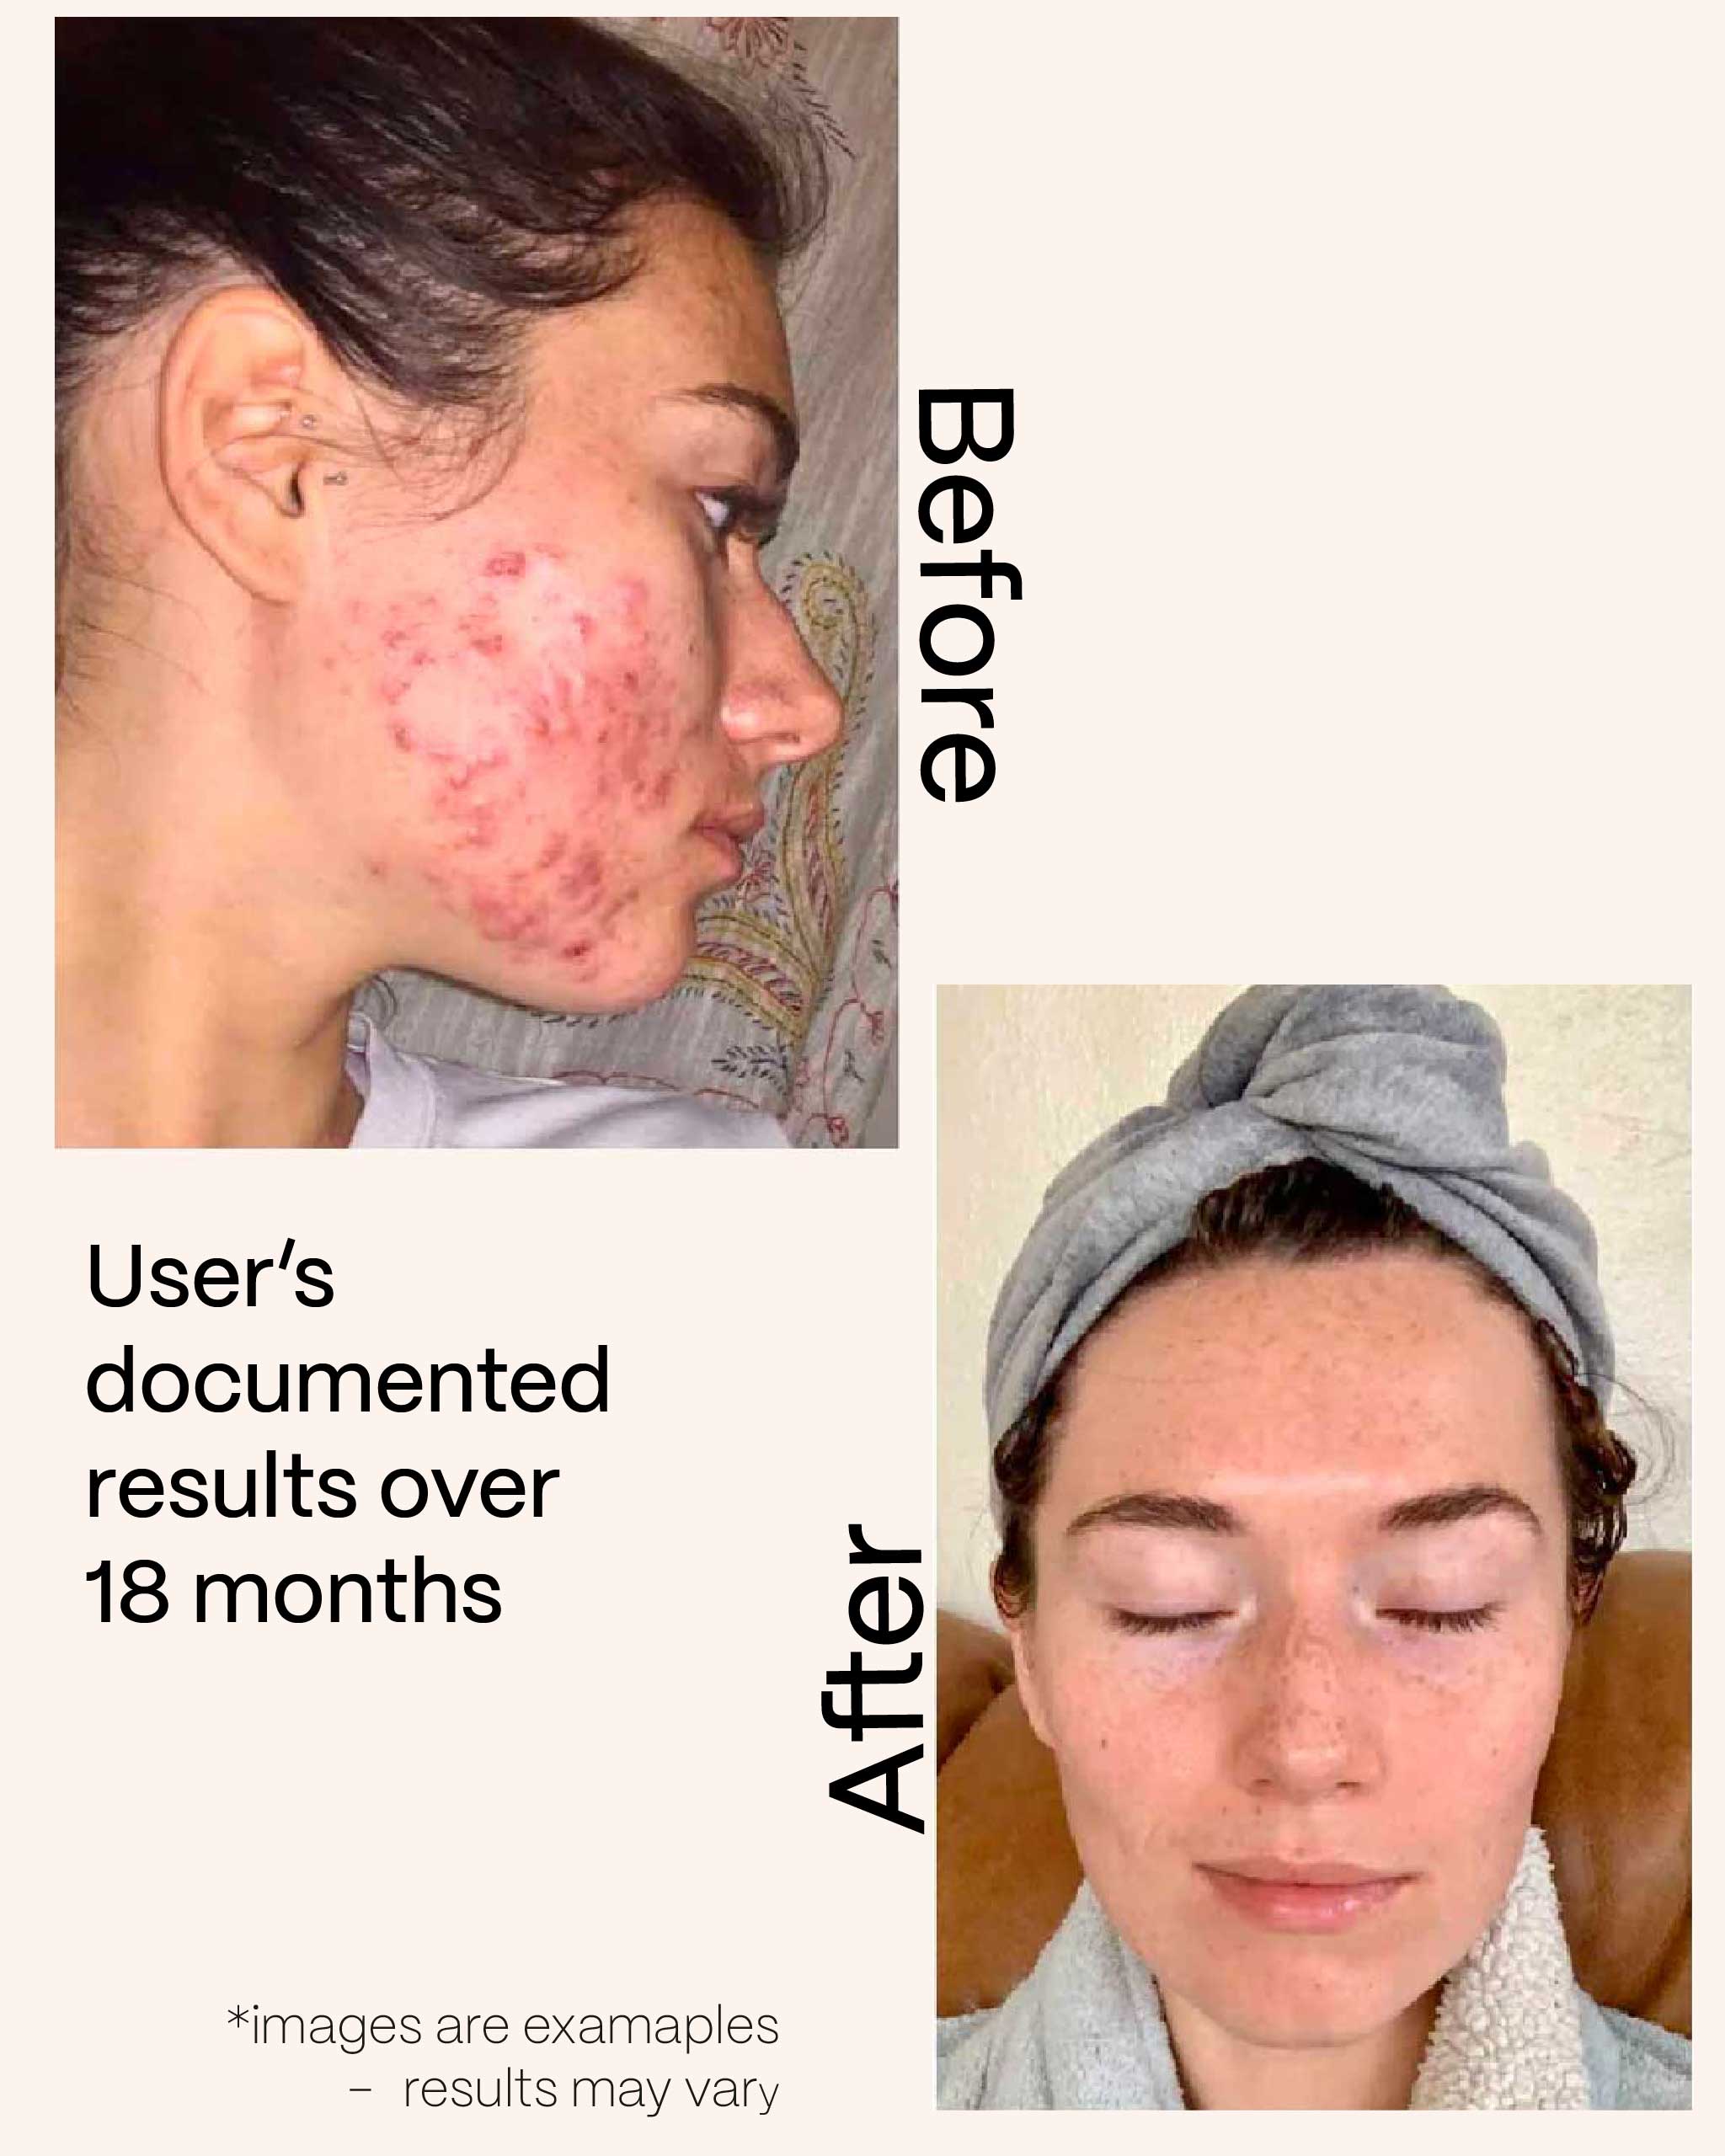 Acne before and after images